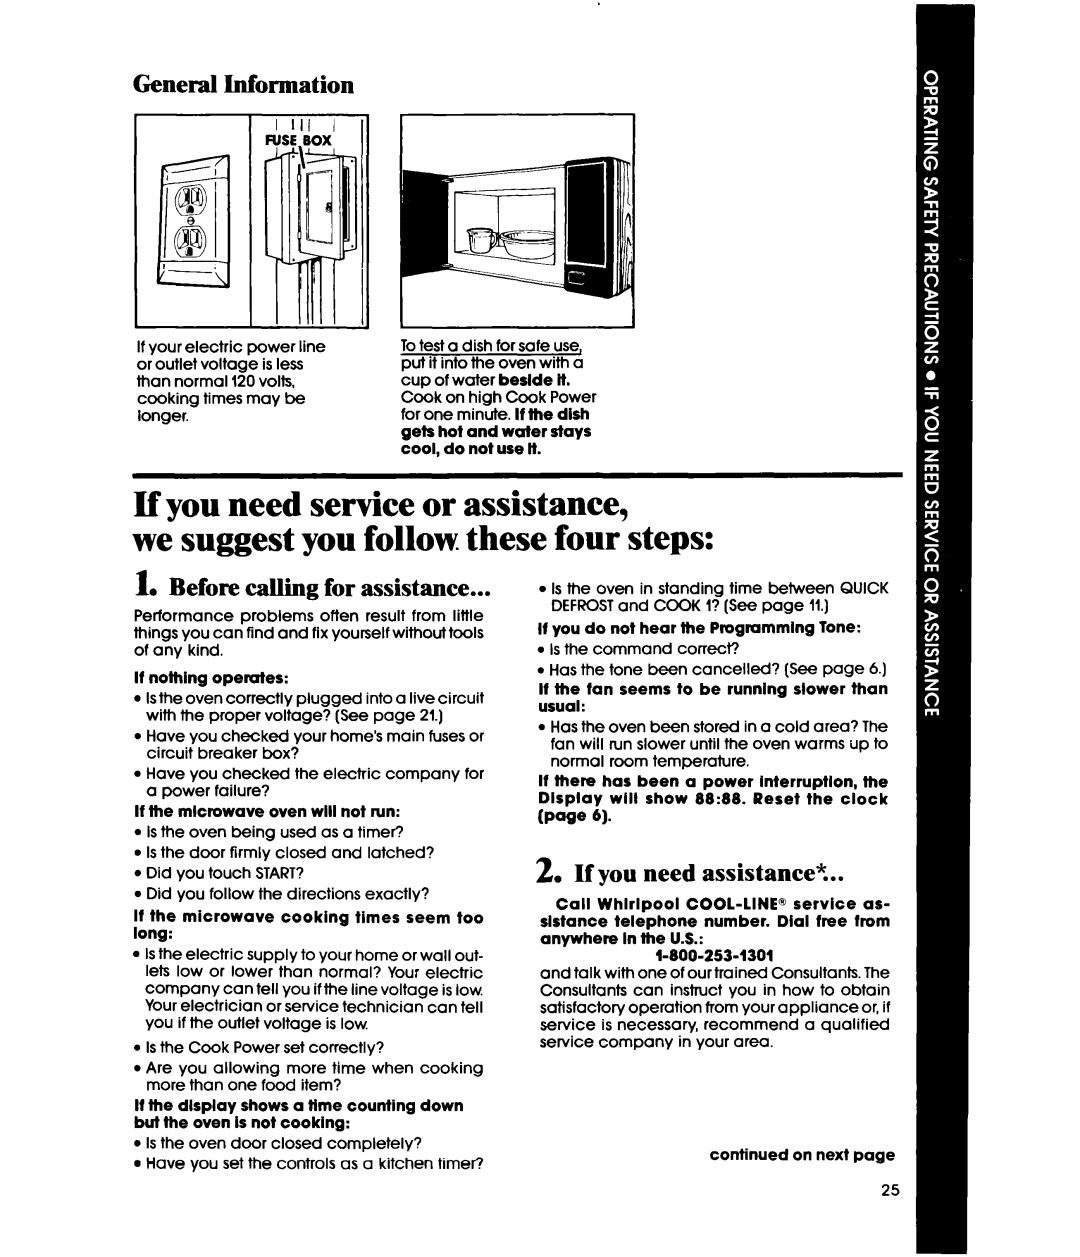 Whirlpool MWl501XS manual If you need service or assistance, we suggest you follow. these four steps, General Information 